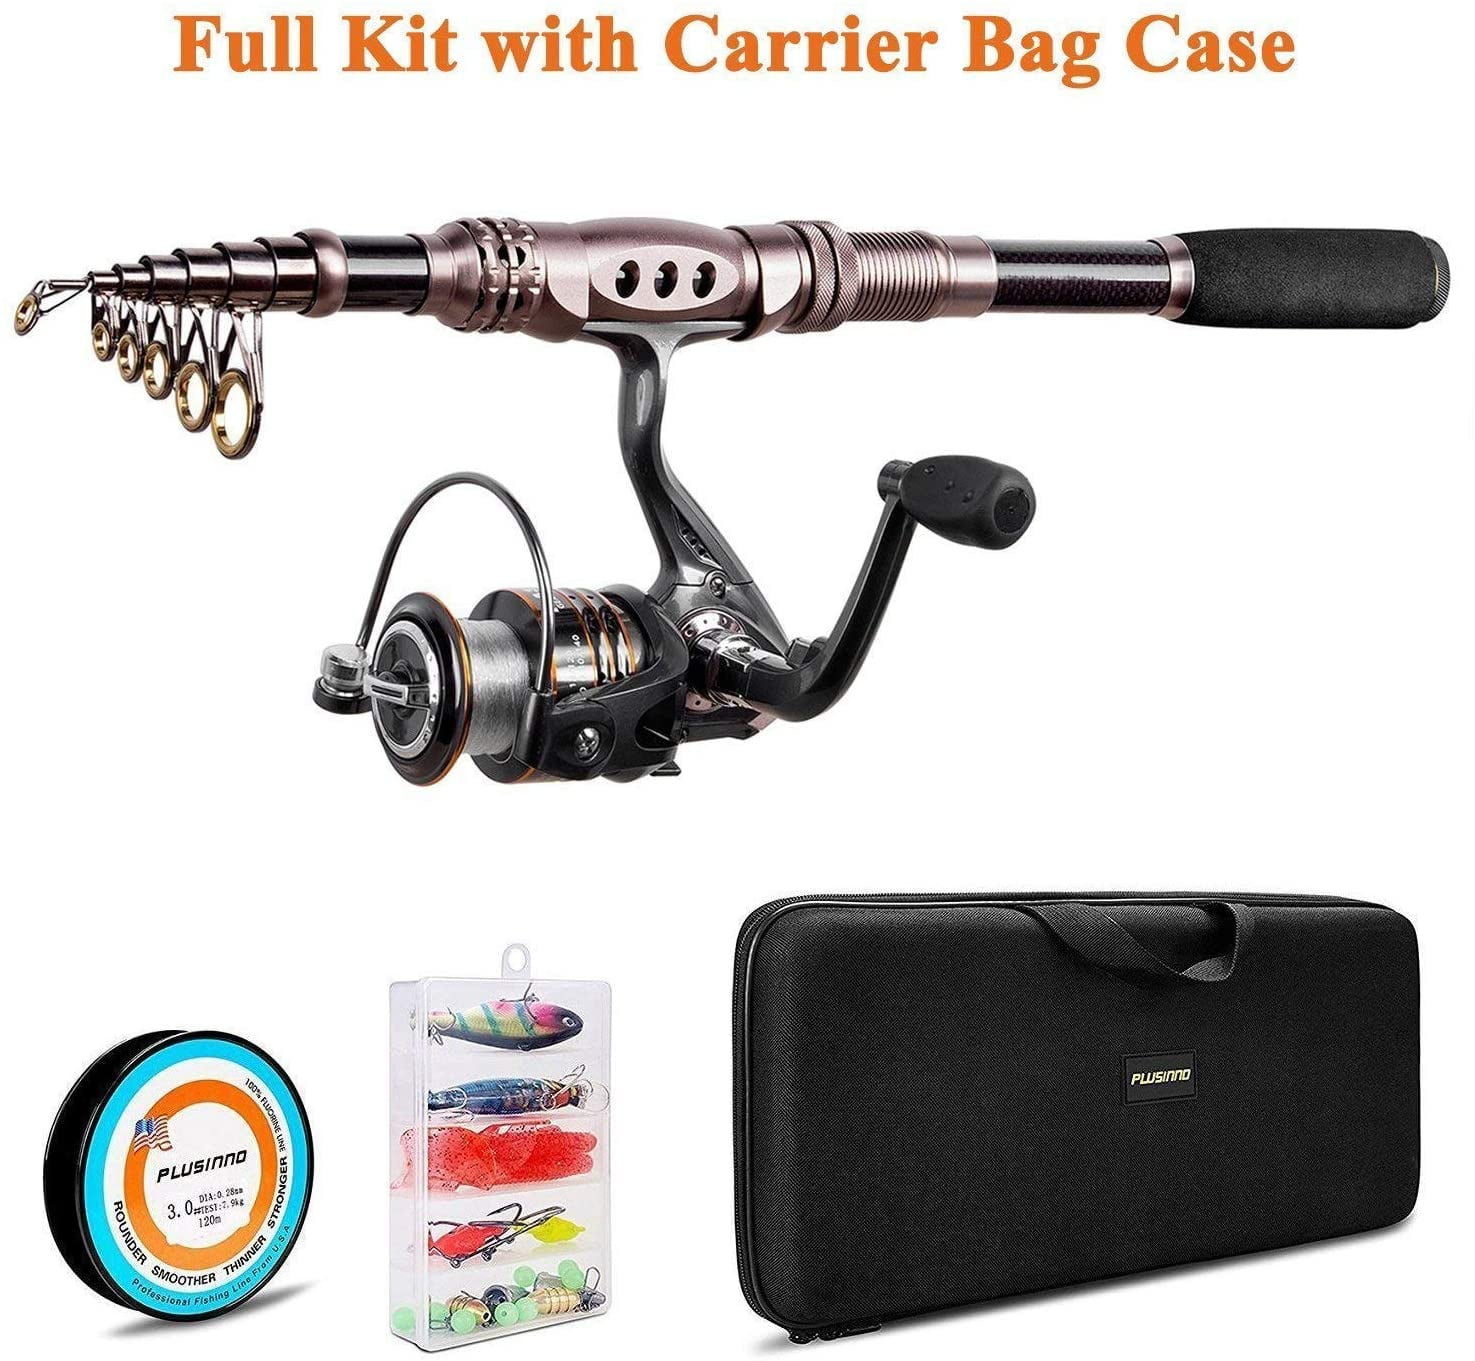 PLUSINNO Eagle Hunting I Telescopic Fishing Rod Reel Combos Full Kit, Spinning  Fishing Pole Line Lures Hooks Reel Fishing Carrier Bag Case Accessories  (Full Kit with Carrier Case,1.8M 5.91FT) 